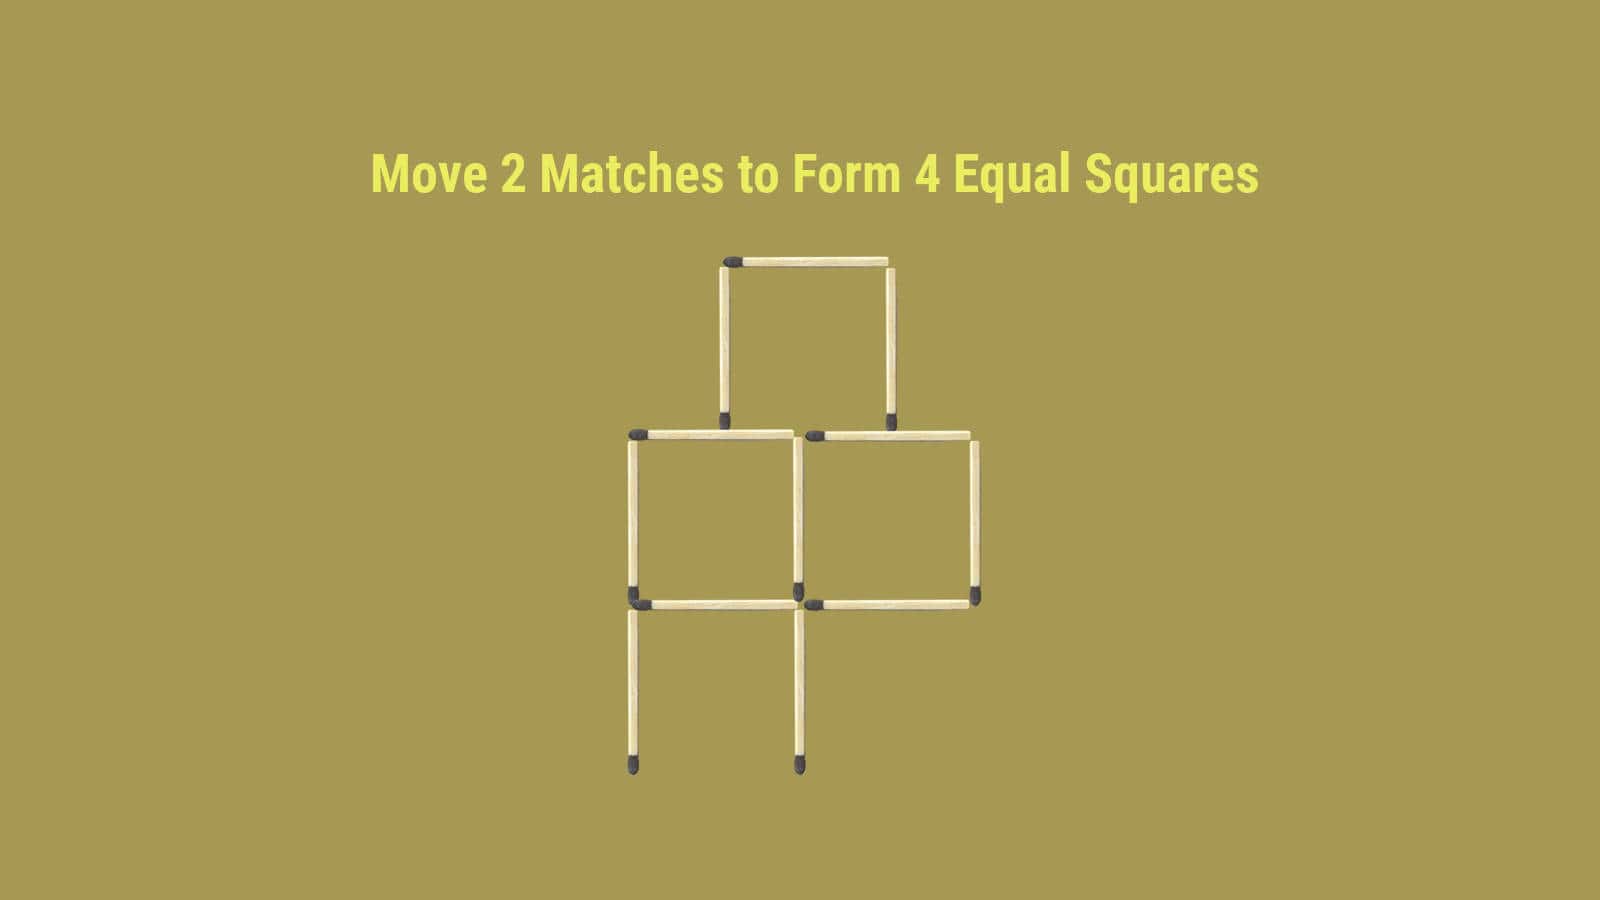 Move 2 matches to make 4 equal squares matchstick puzzle